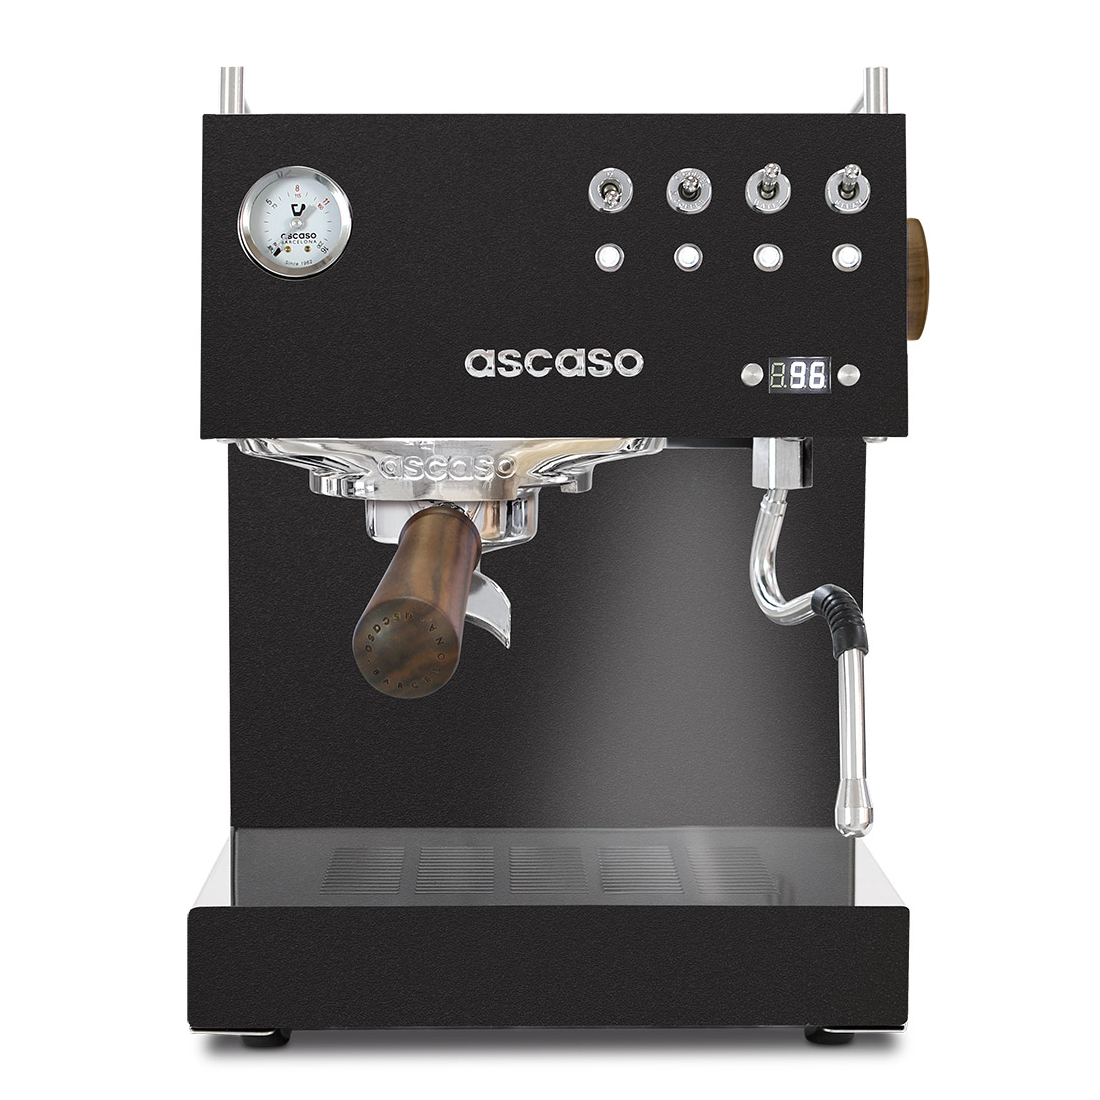 ASCASO ,UNO.22, 1 Group Coffee Machine Uno PID Black with Wooden Handles|mkayn|مكاين